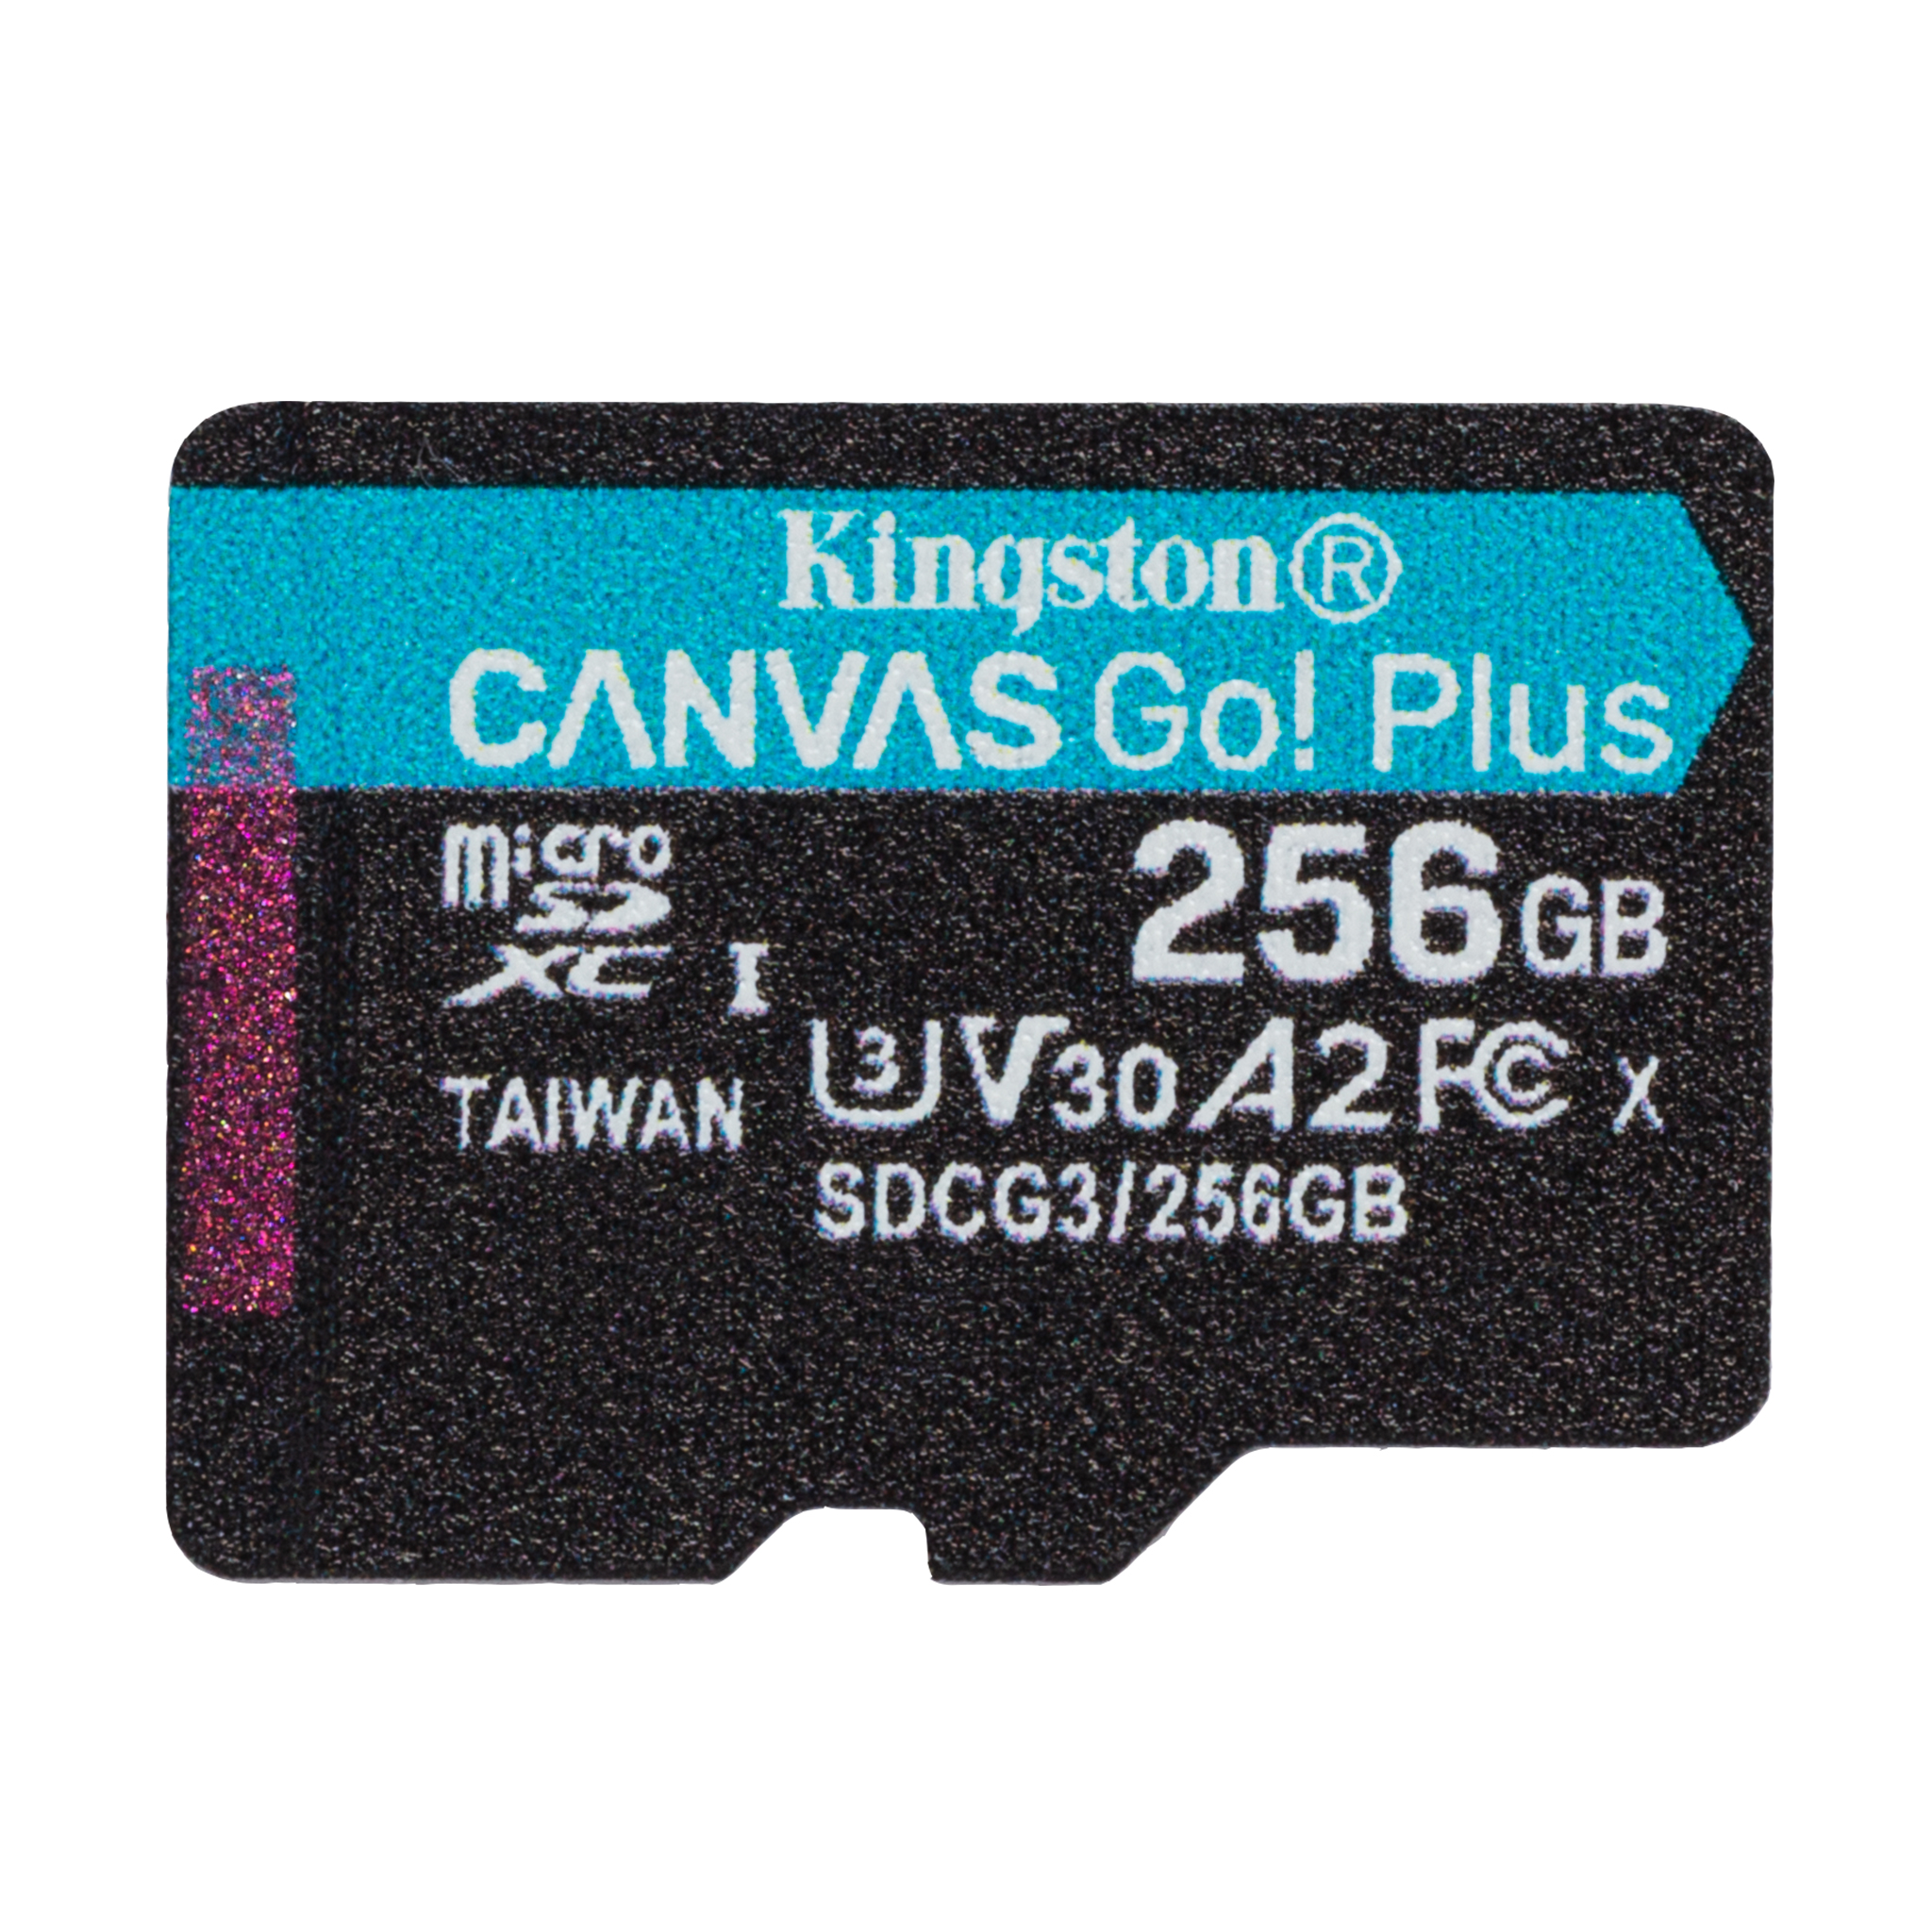 100MBs Works with Kingston Kingston 64GB Celkon A43 MicroSDXC Canvas Select Plus Card Verified by SanFlash. 